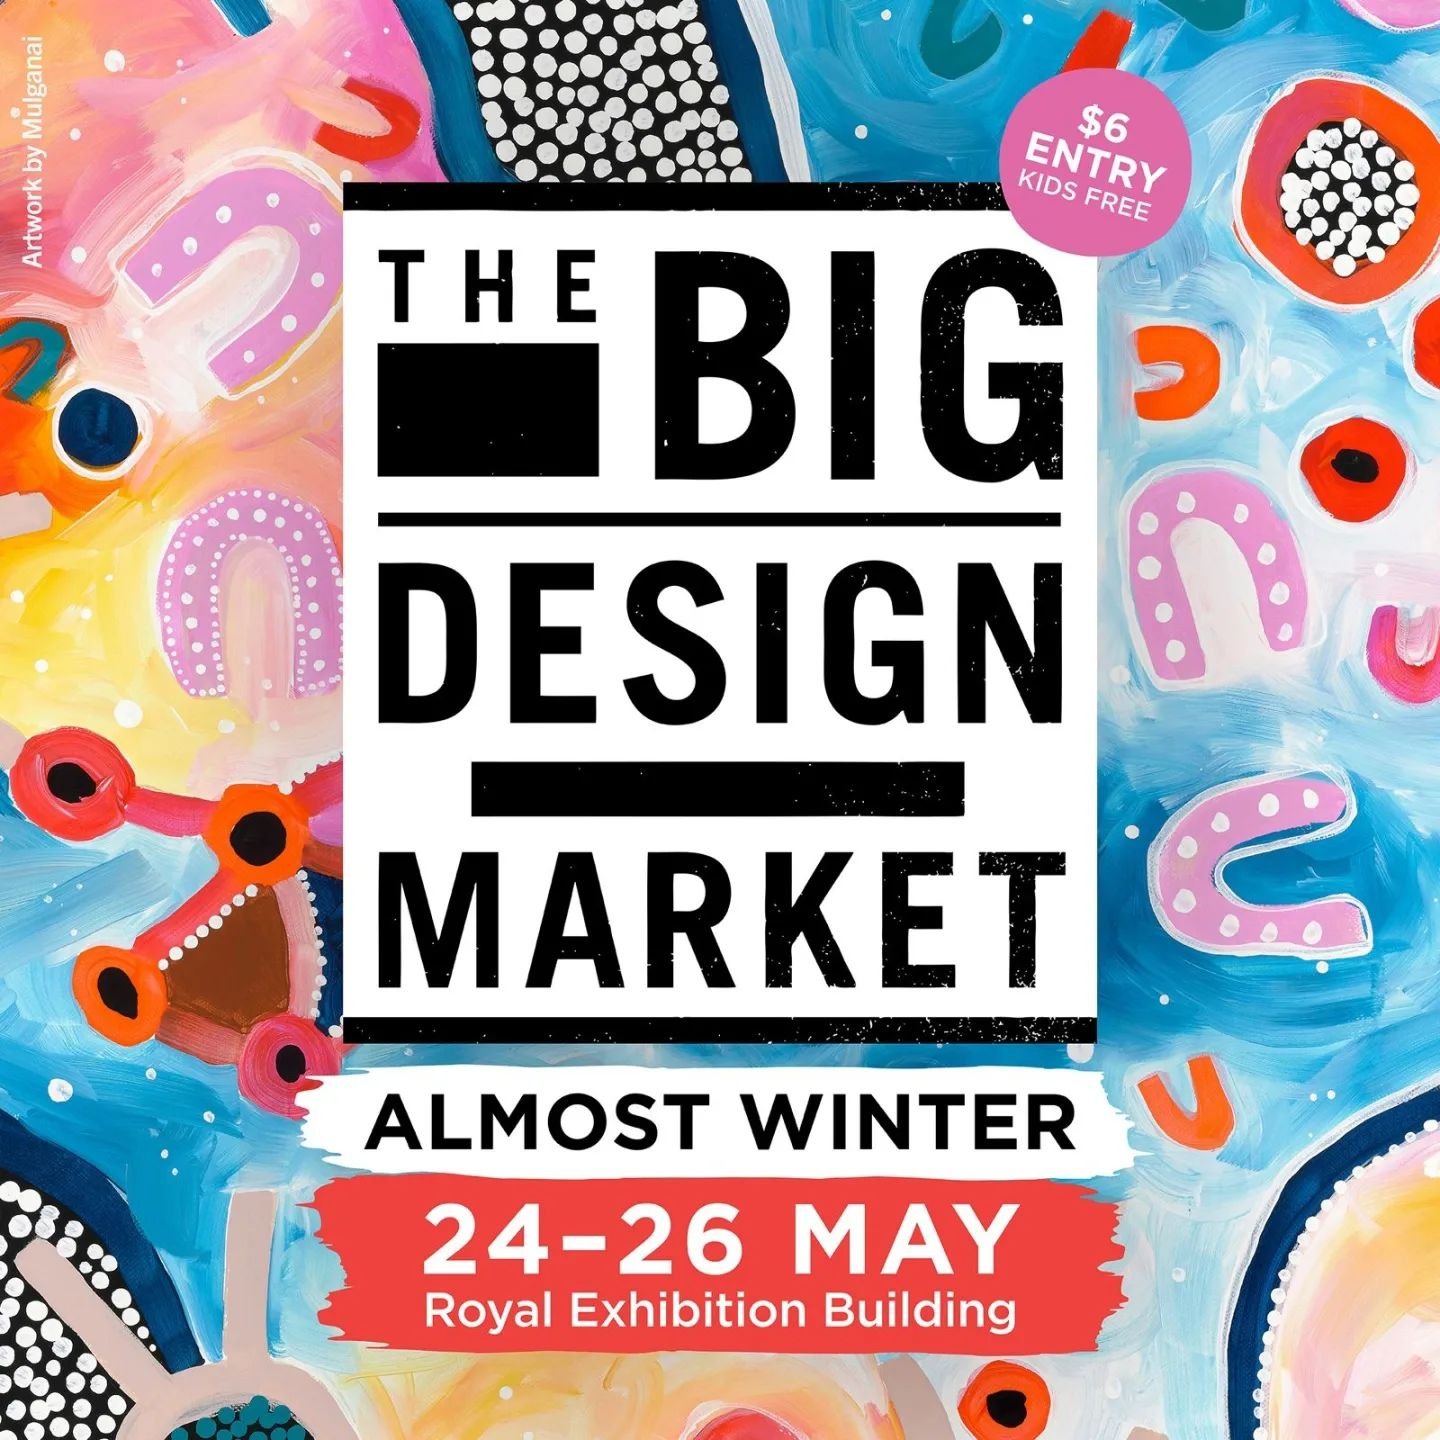 @bigdesignmarket is next week, mamamiaaaaa 
I&rsquo;m working my ass off to show you as many novelties as I can paint 🎨🖌️ Hope to see you there friends! 💙

Friday 24 May, 11am&ndash;8pm
Saturday 25 May, 10am&ndash;7pm
Sunday 26 May, 10am&ndash;5pm